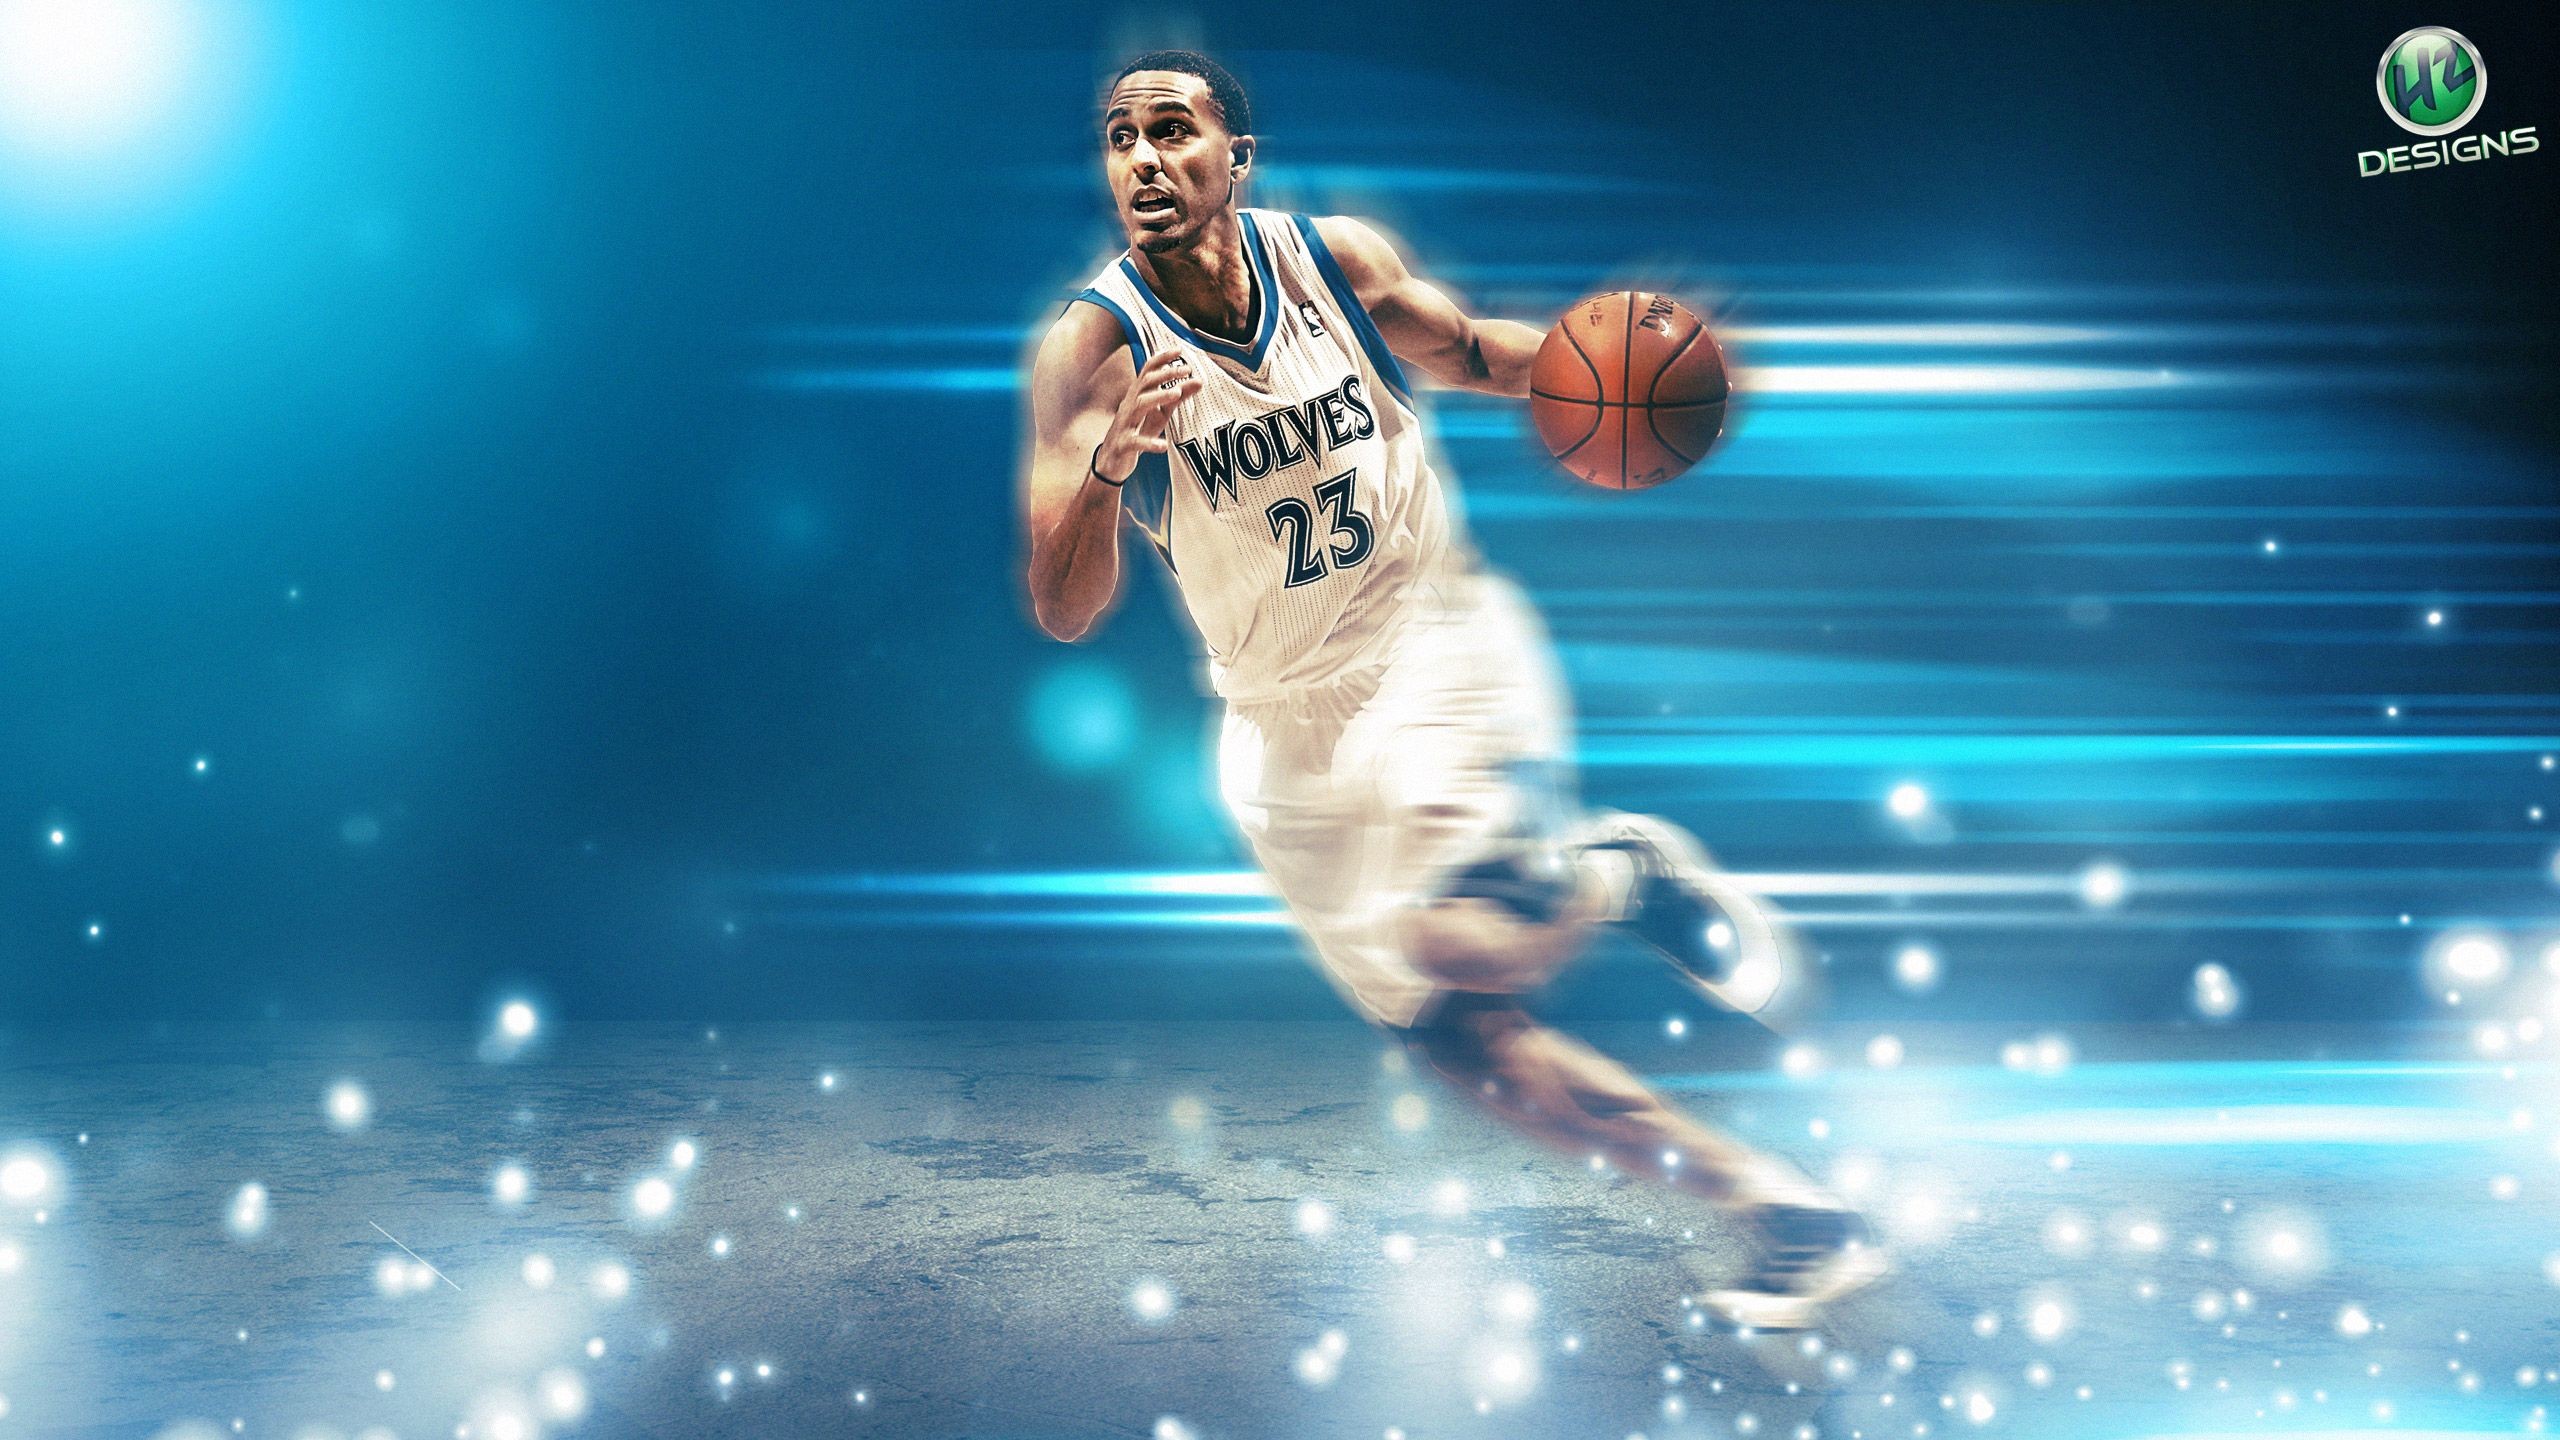 2560x1440 Minnesota Timberwolves Iphone Wallpaper Pictures to Pin on